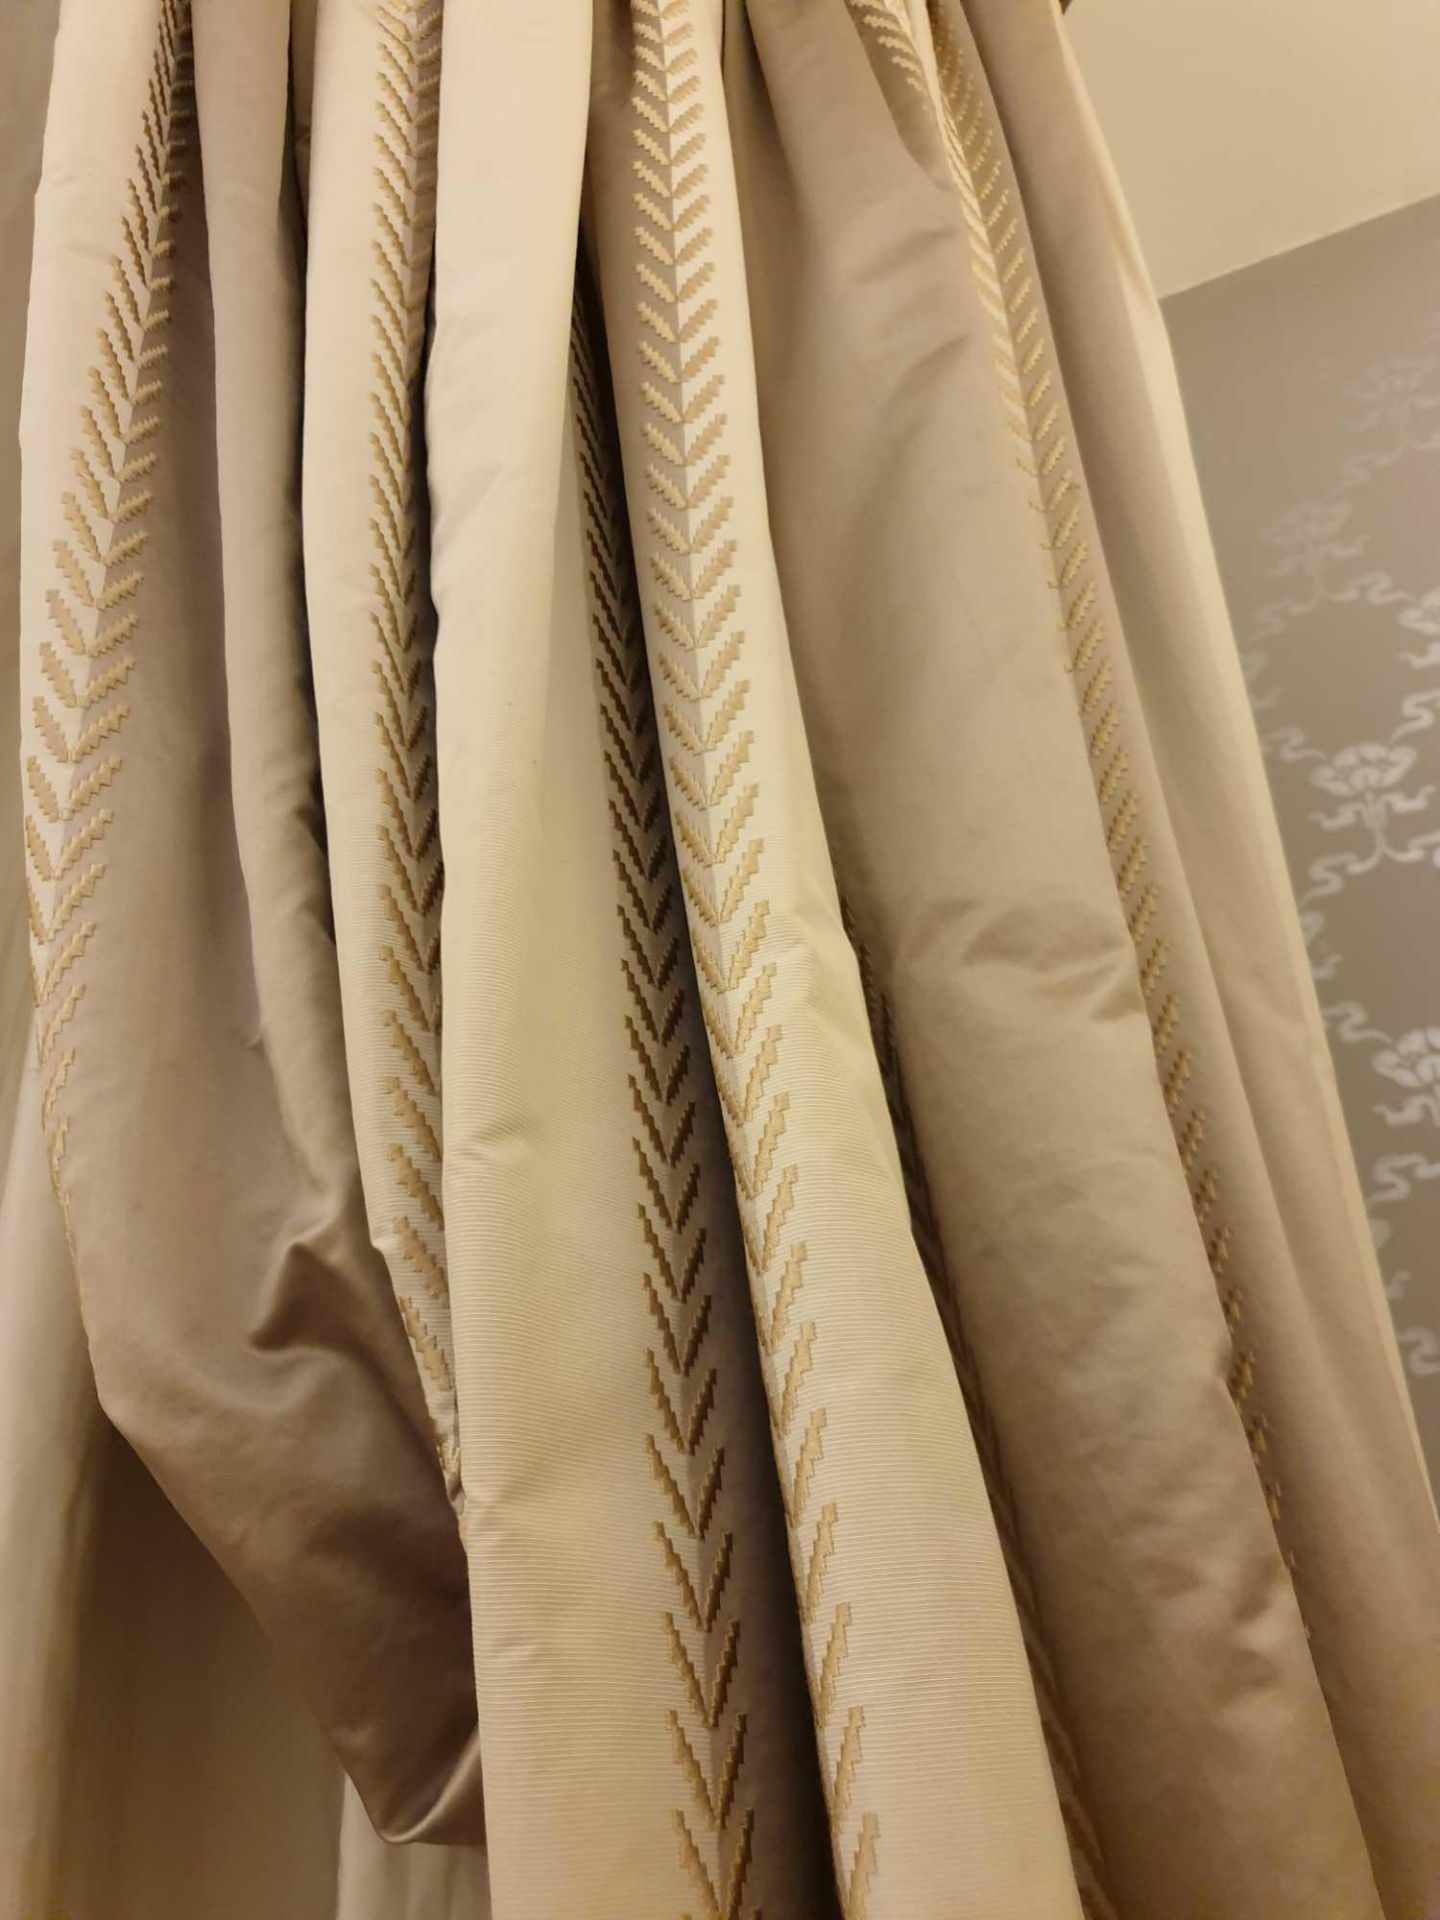 A Pair Of Silk Drapes And Jabots Gold And Dark Gold Stripes With Piping 220 x 280cm (Room 721) - Image 4 of 4